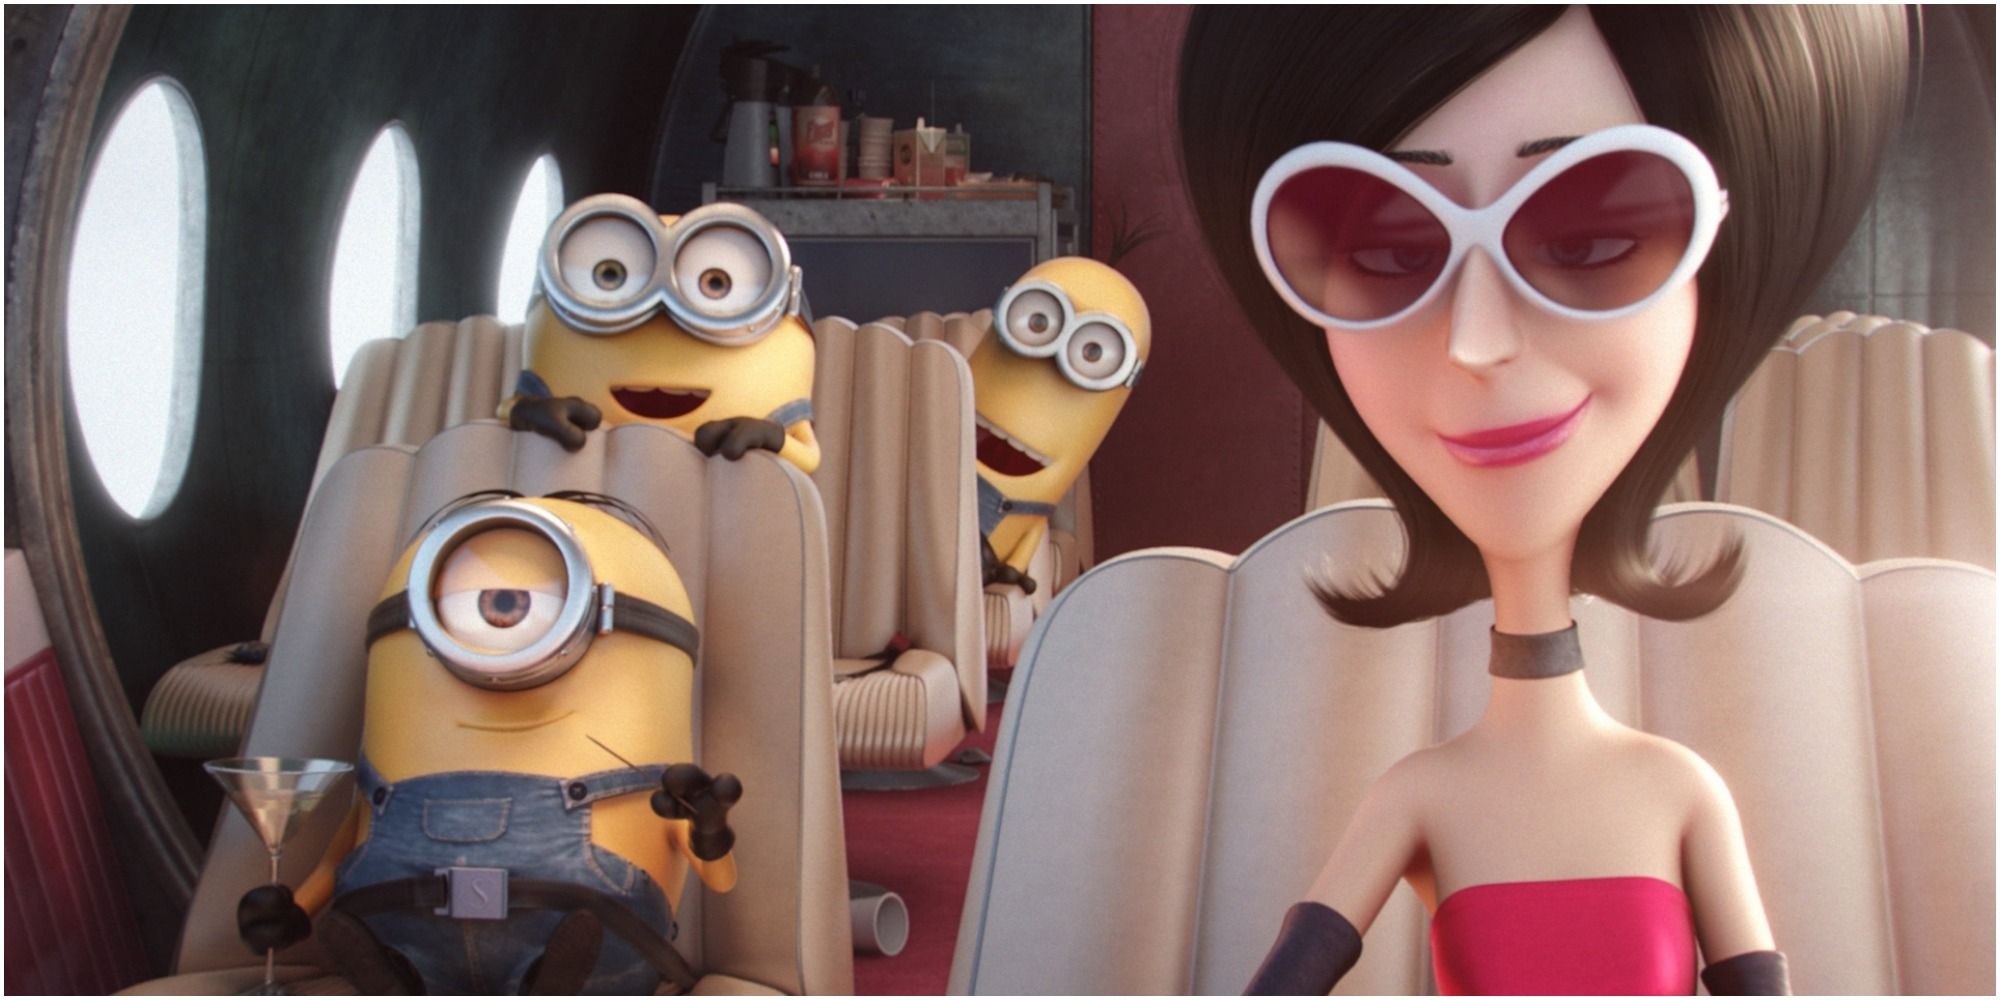 Scarlet with some Minions in Minions